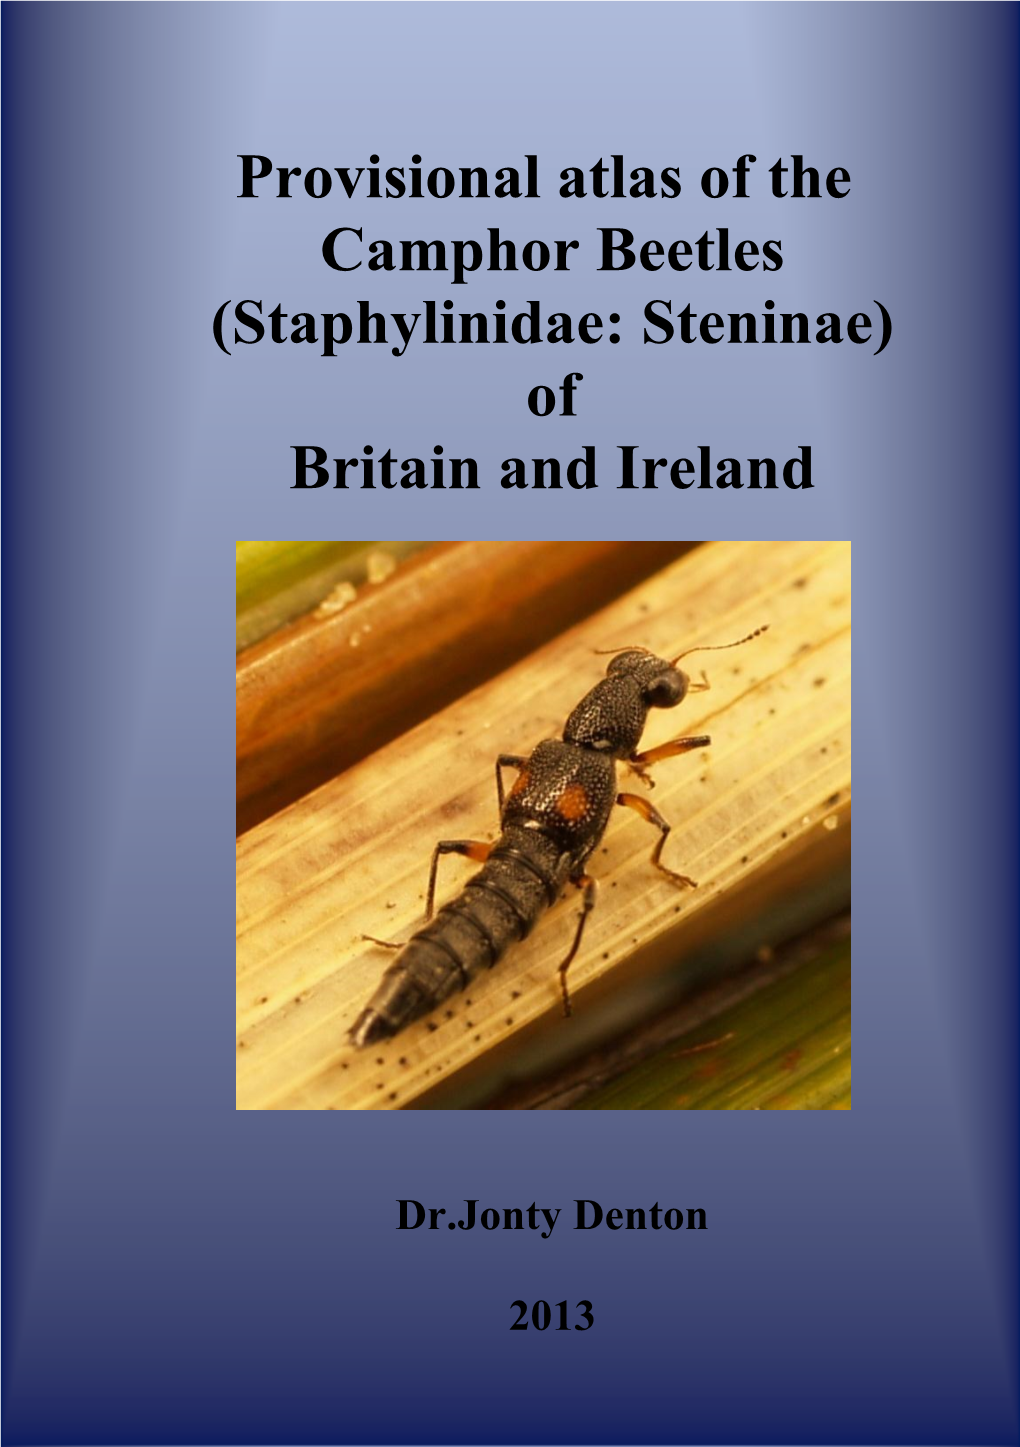 Provisional Atlas of the Camphor Beetles (Staphylinidae: Steninae) of Britain and Ireland